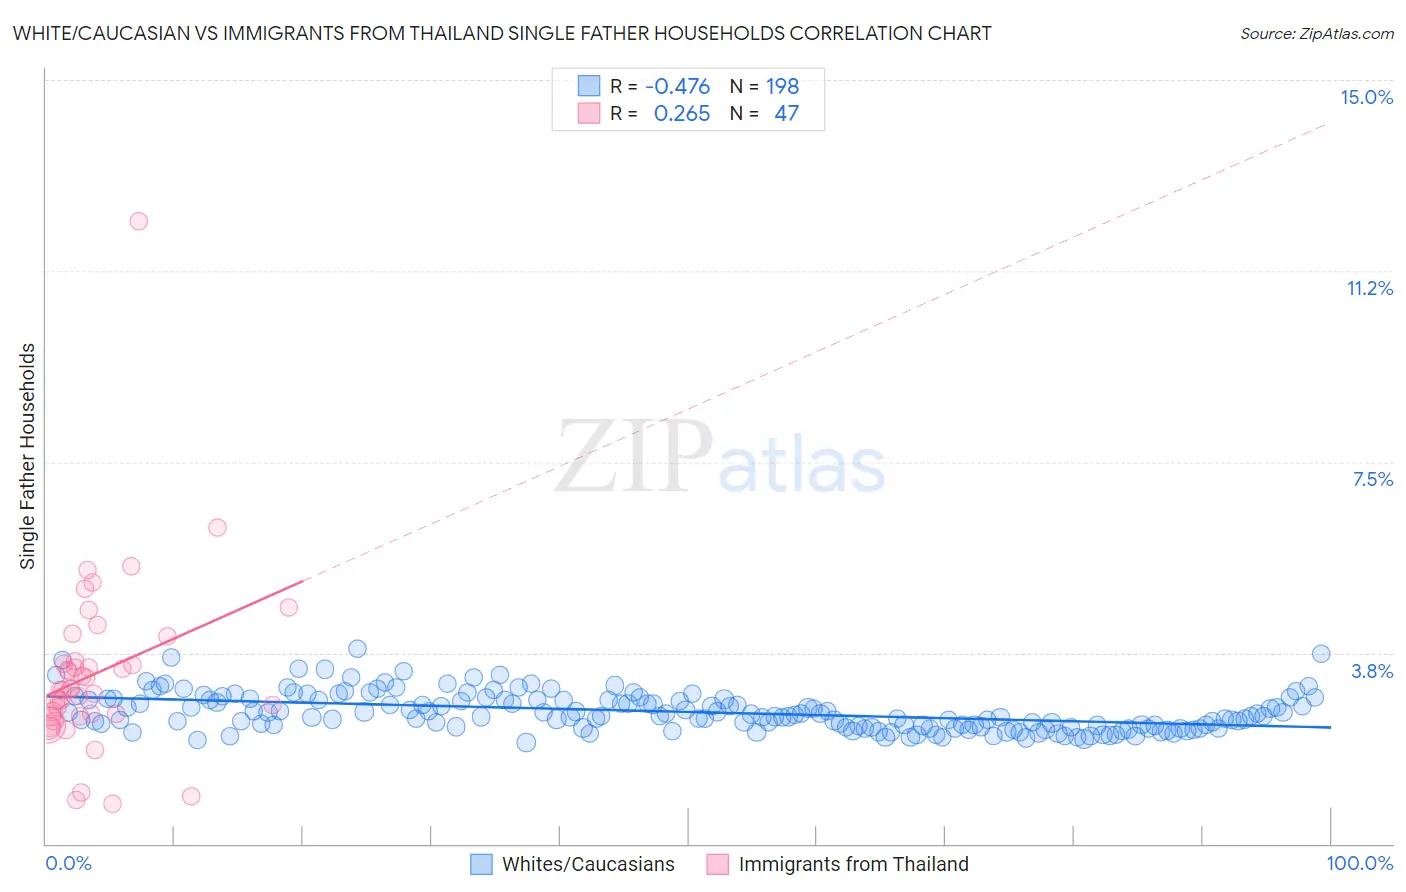 White/Caucasian vs Immigrants from Thailand Single Father Households